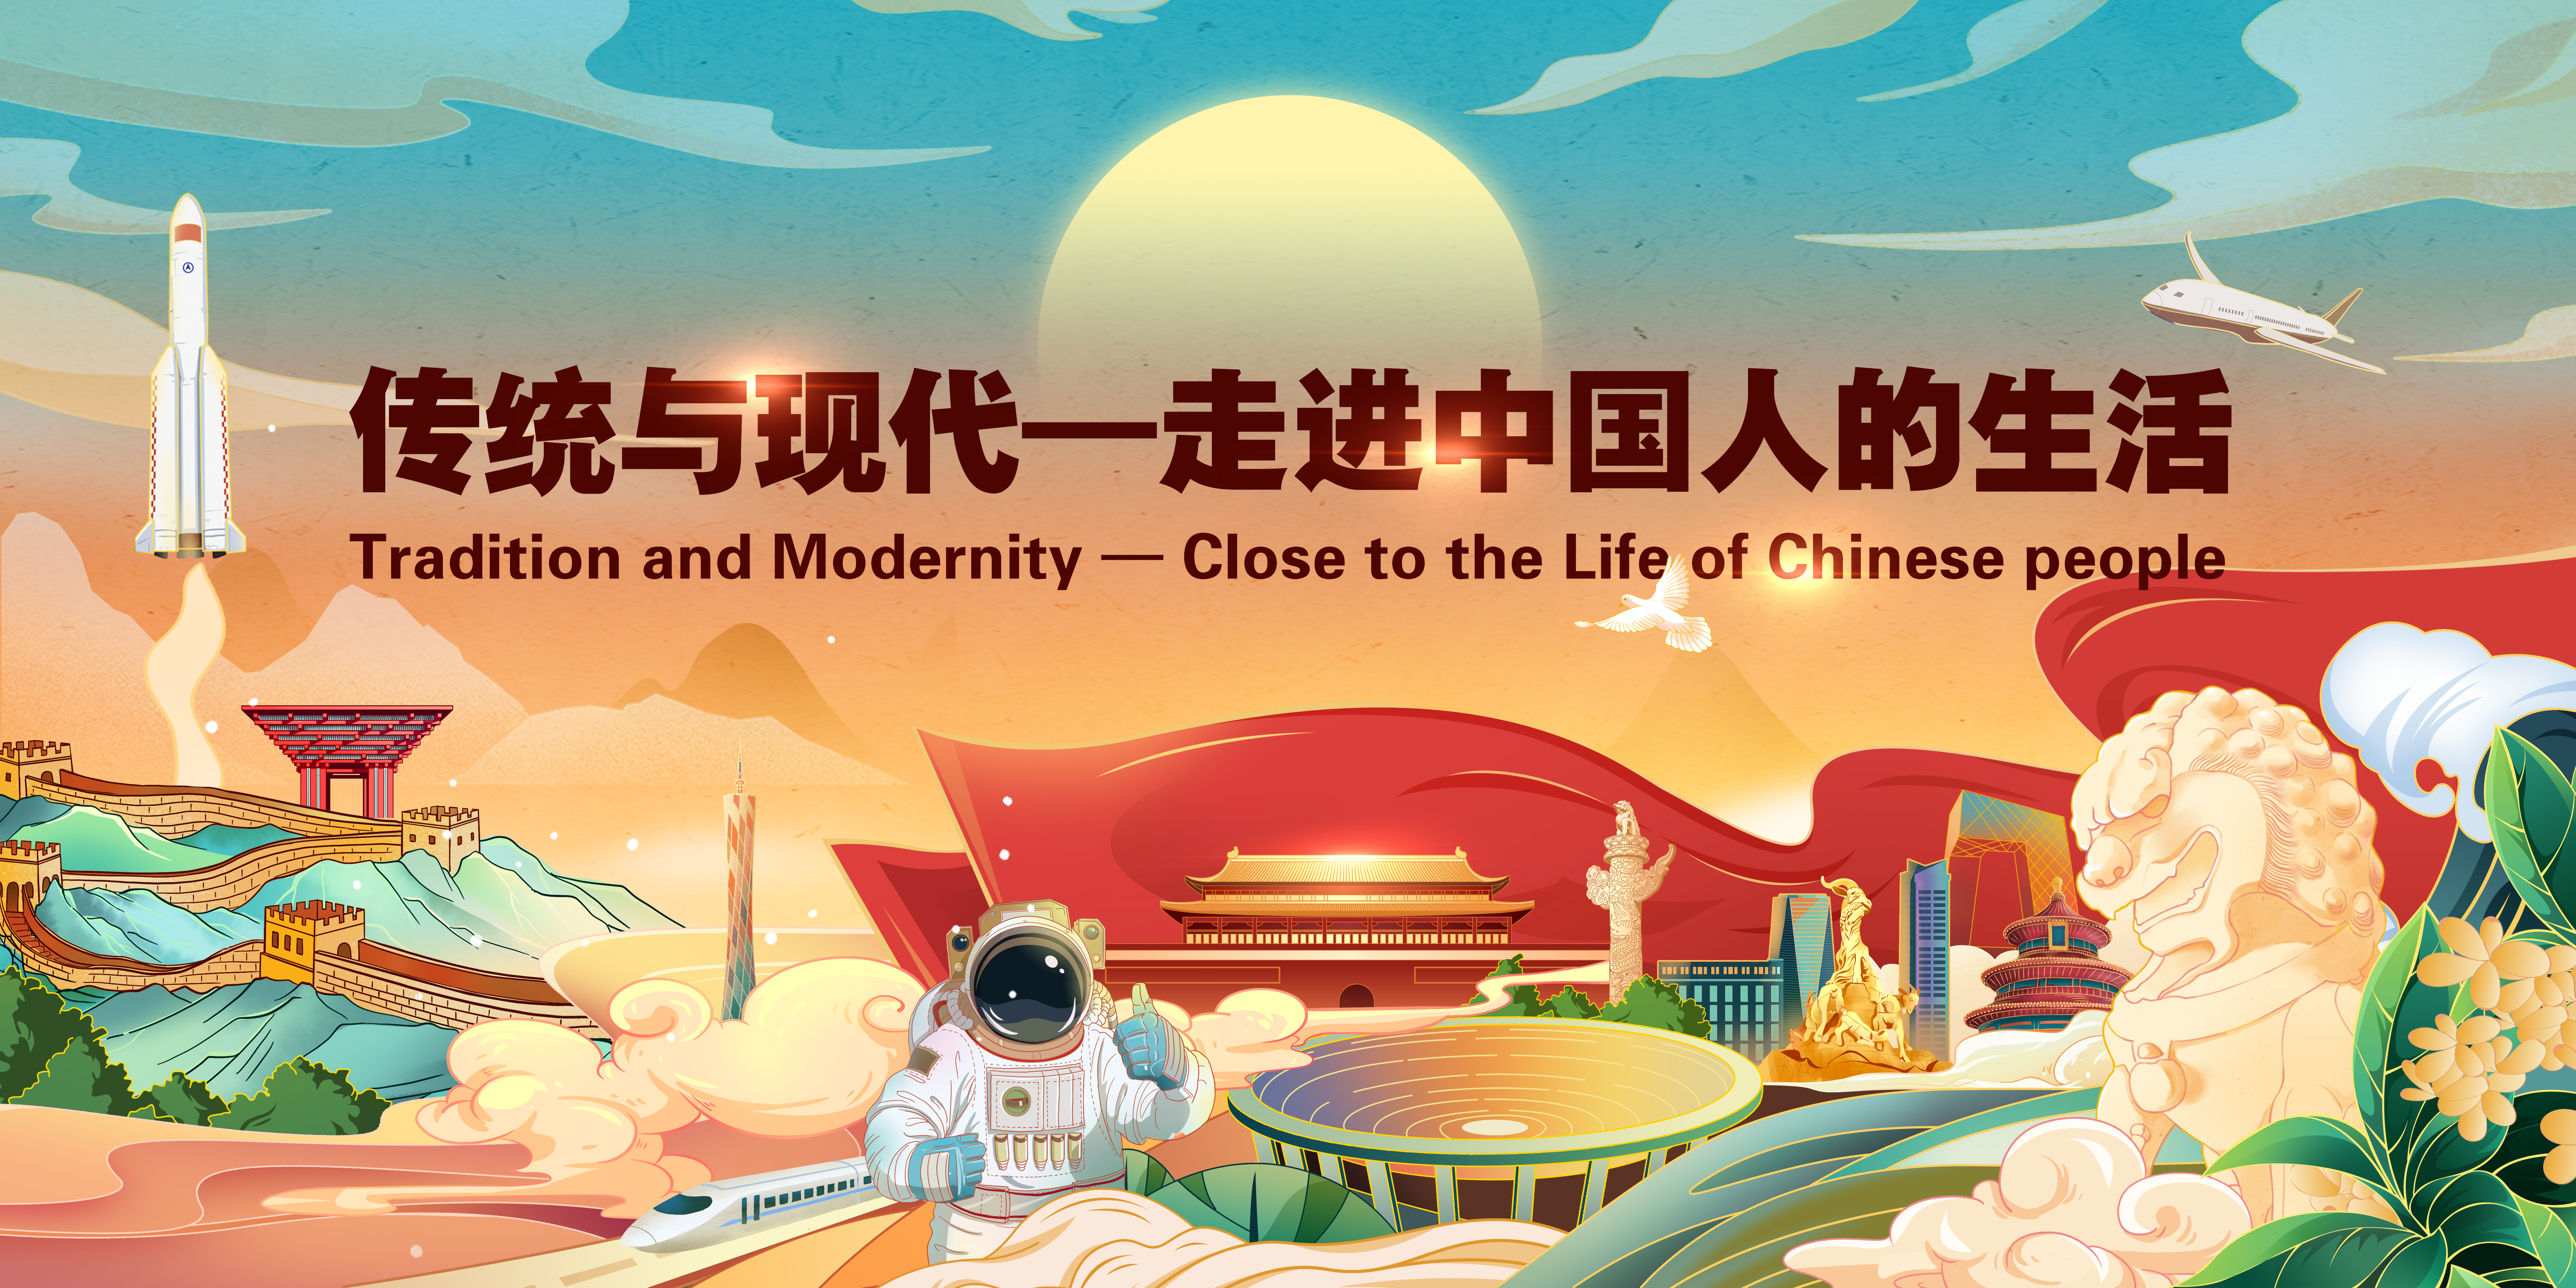 Tradition and Modernity -Close to the Life of Chinese people